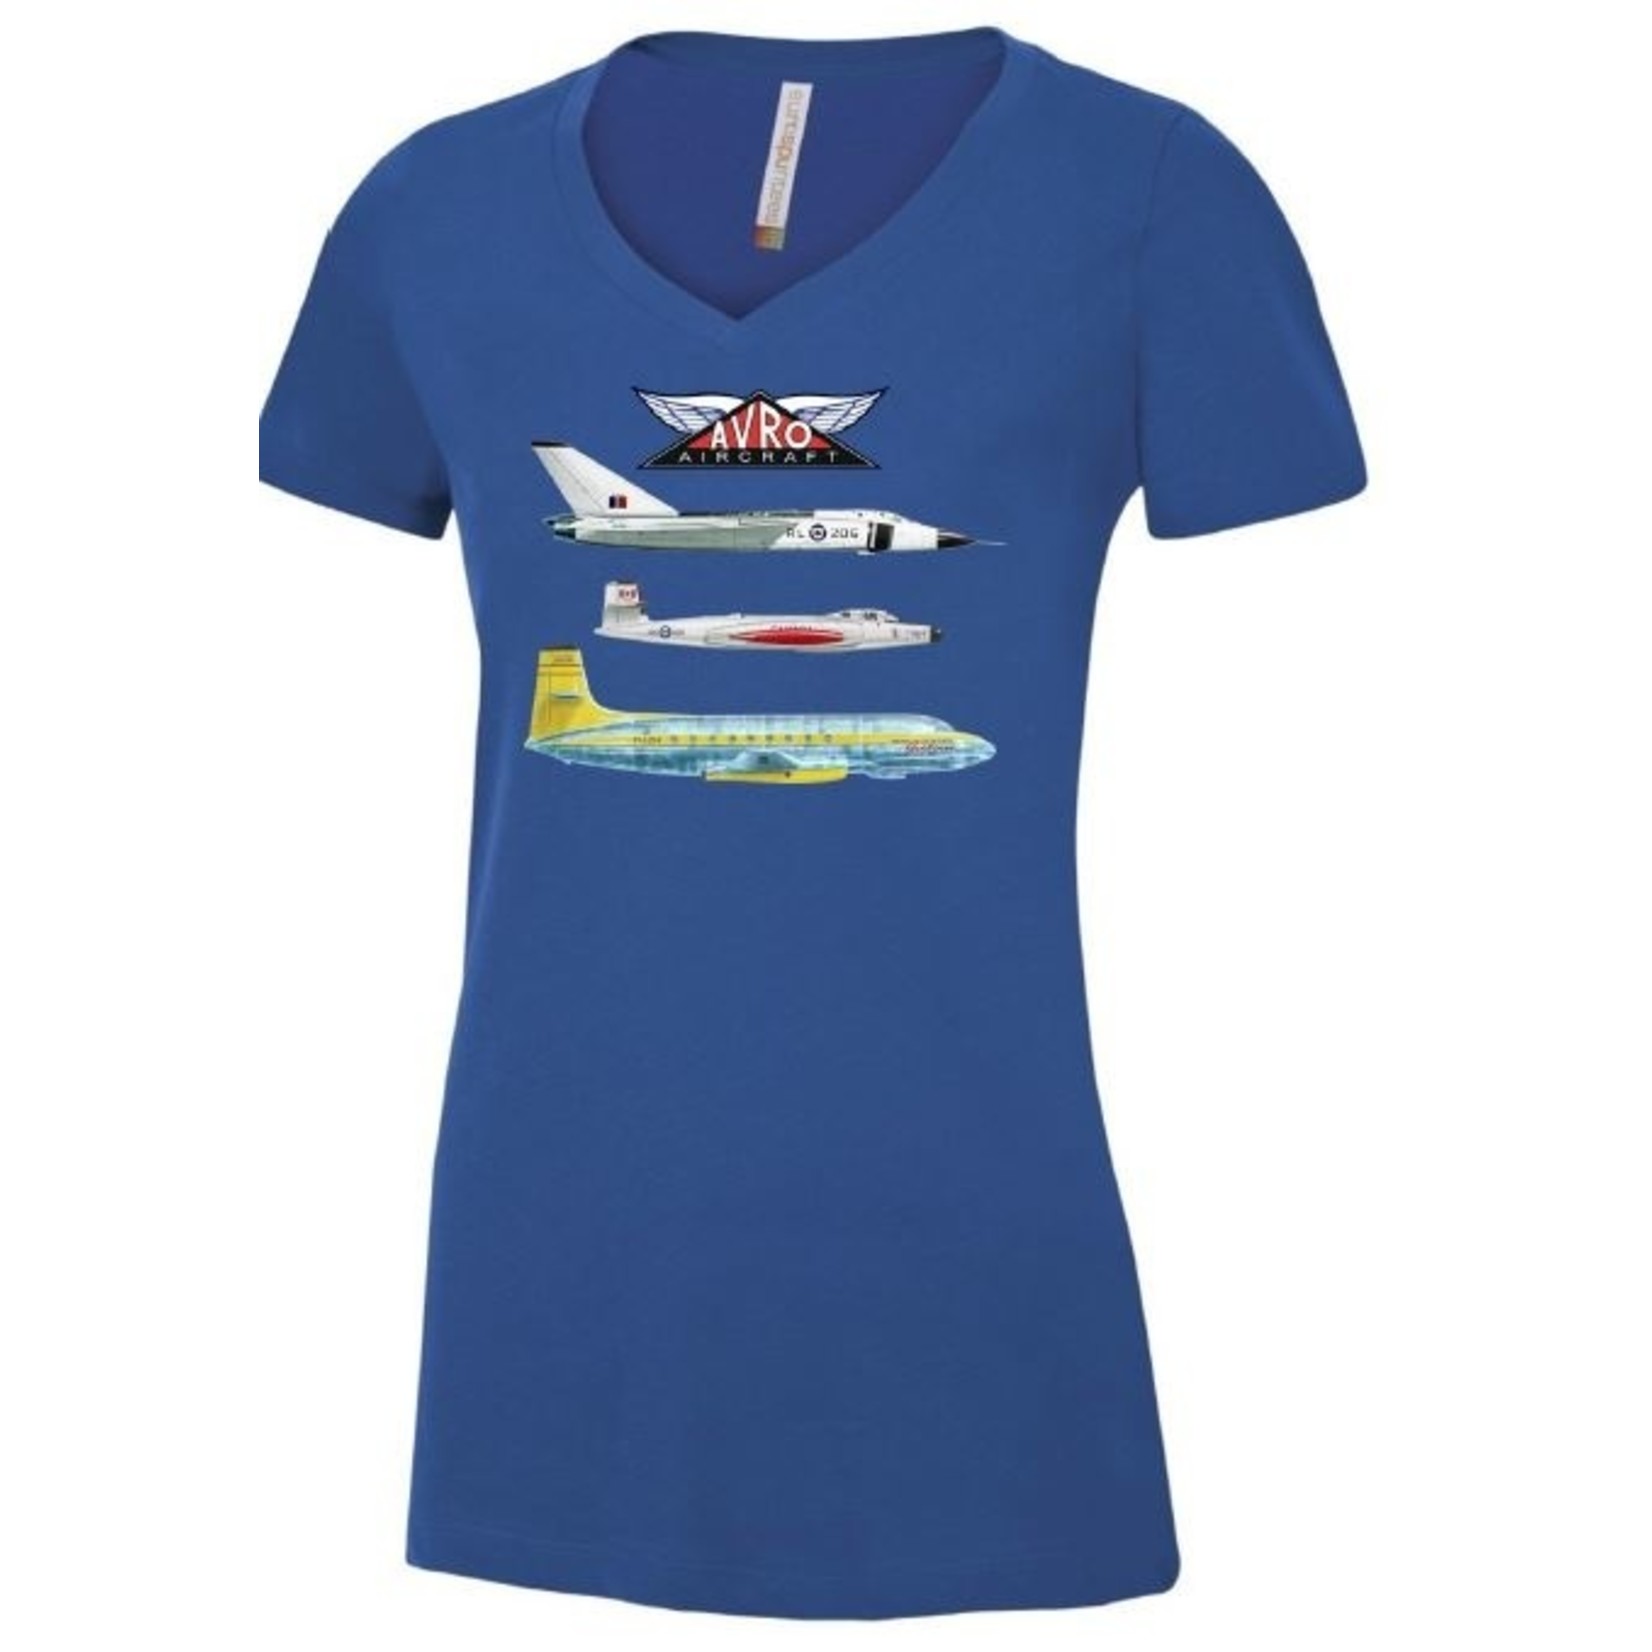 Aviation and Space T-shirt Avro jet montage